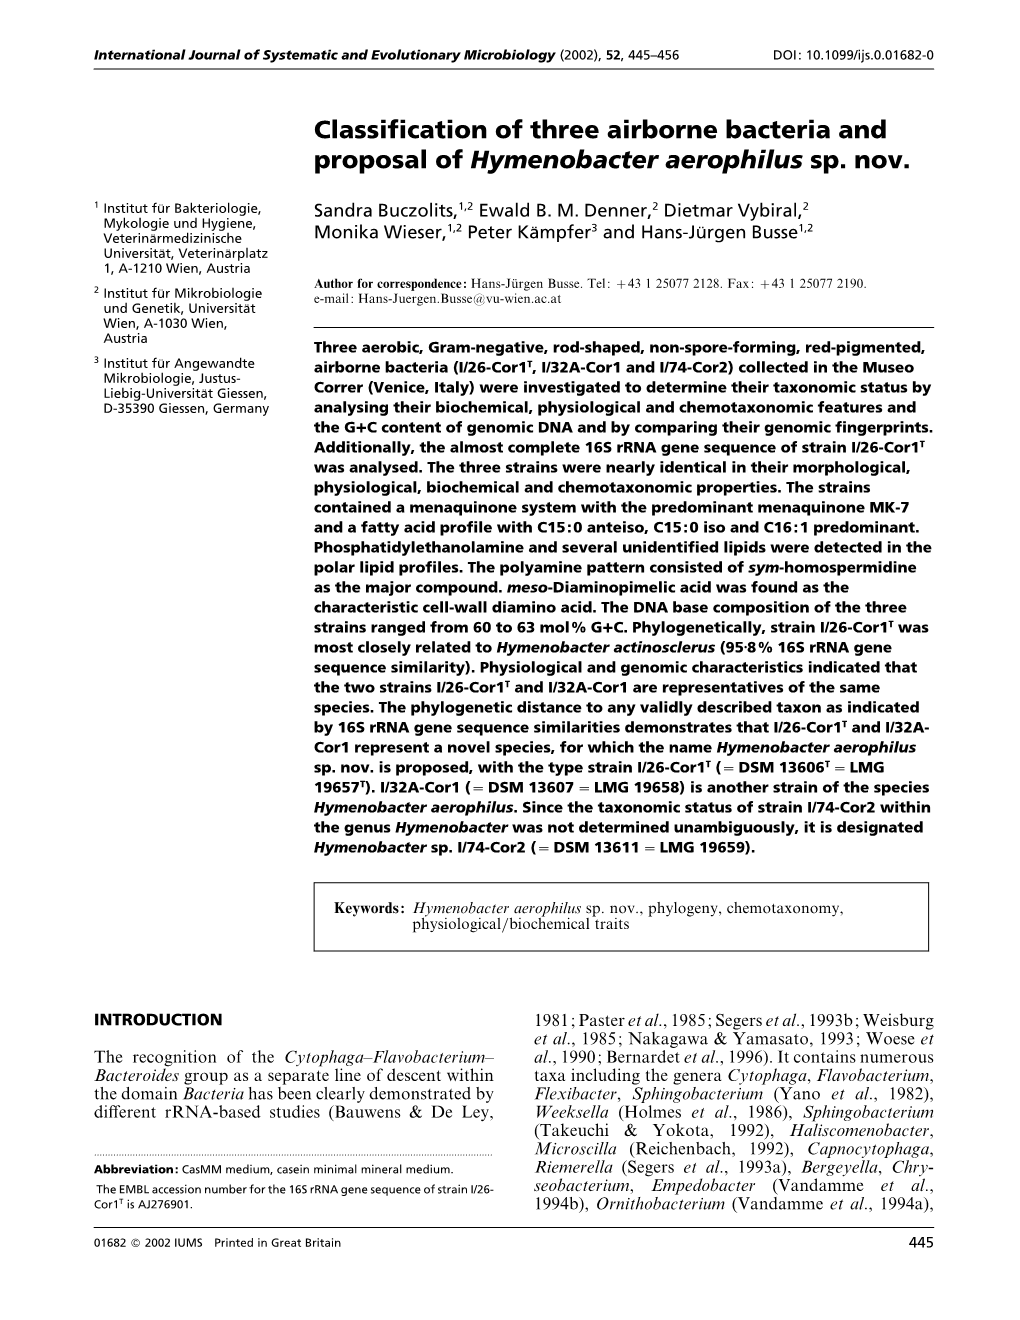 Classification of Three Airborne Bacteria and Proposal Of